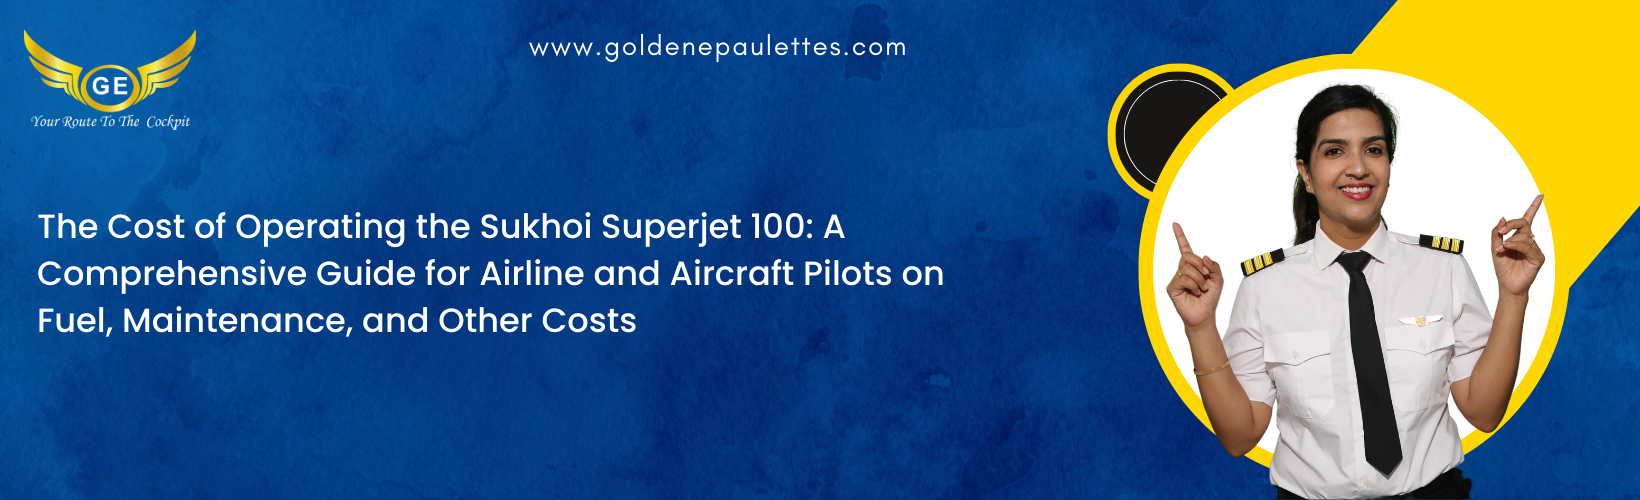 The Cost of Operating the Sukhoi Superjet 100